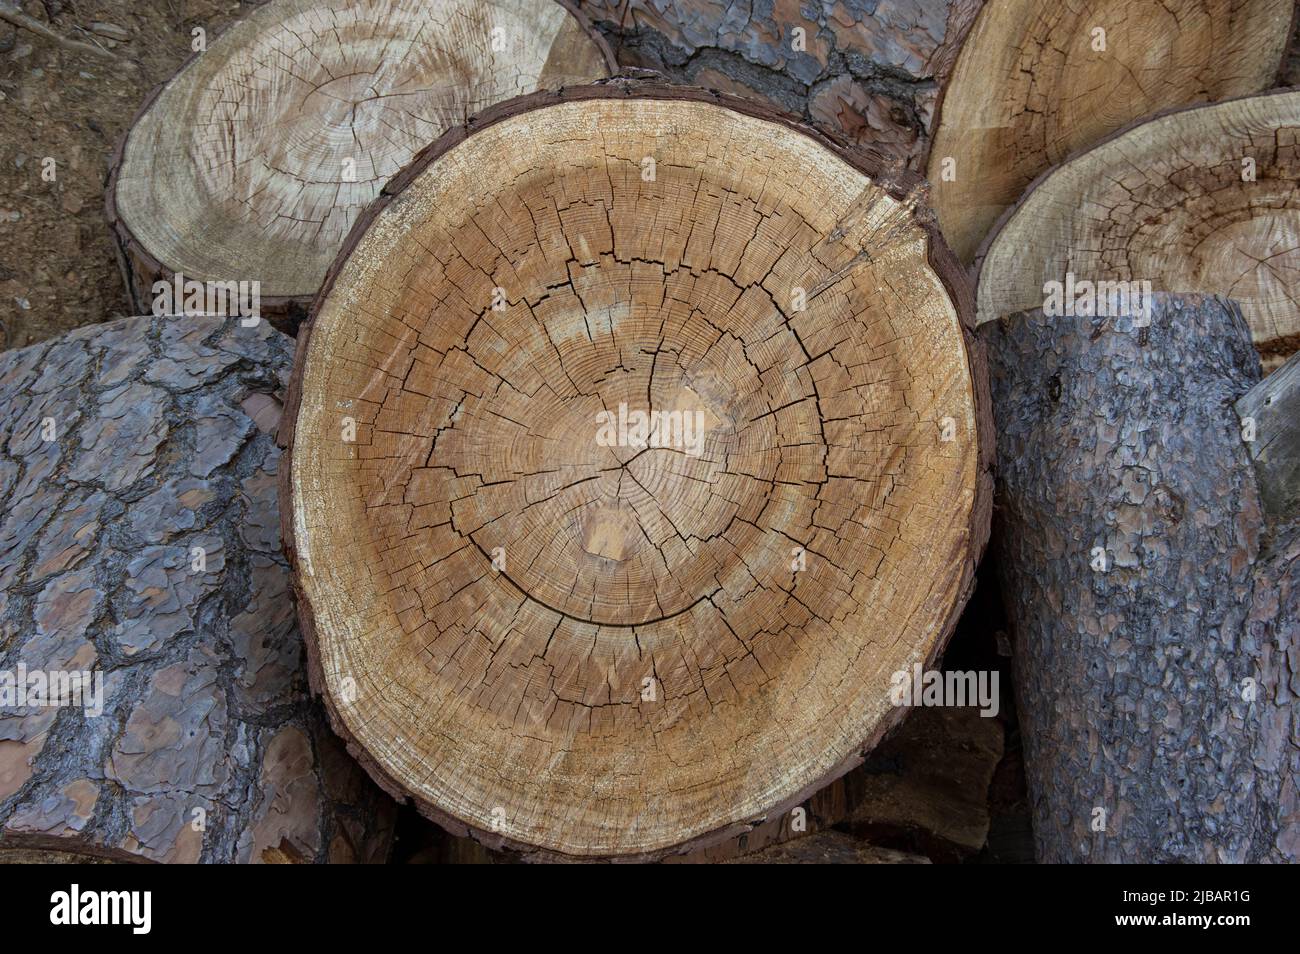 A pile of firewood logs and stumps, the resources of wood-cutting industry Stock Photo